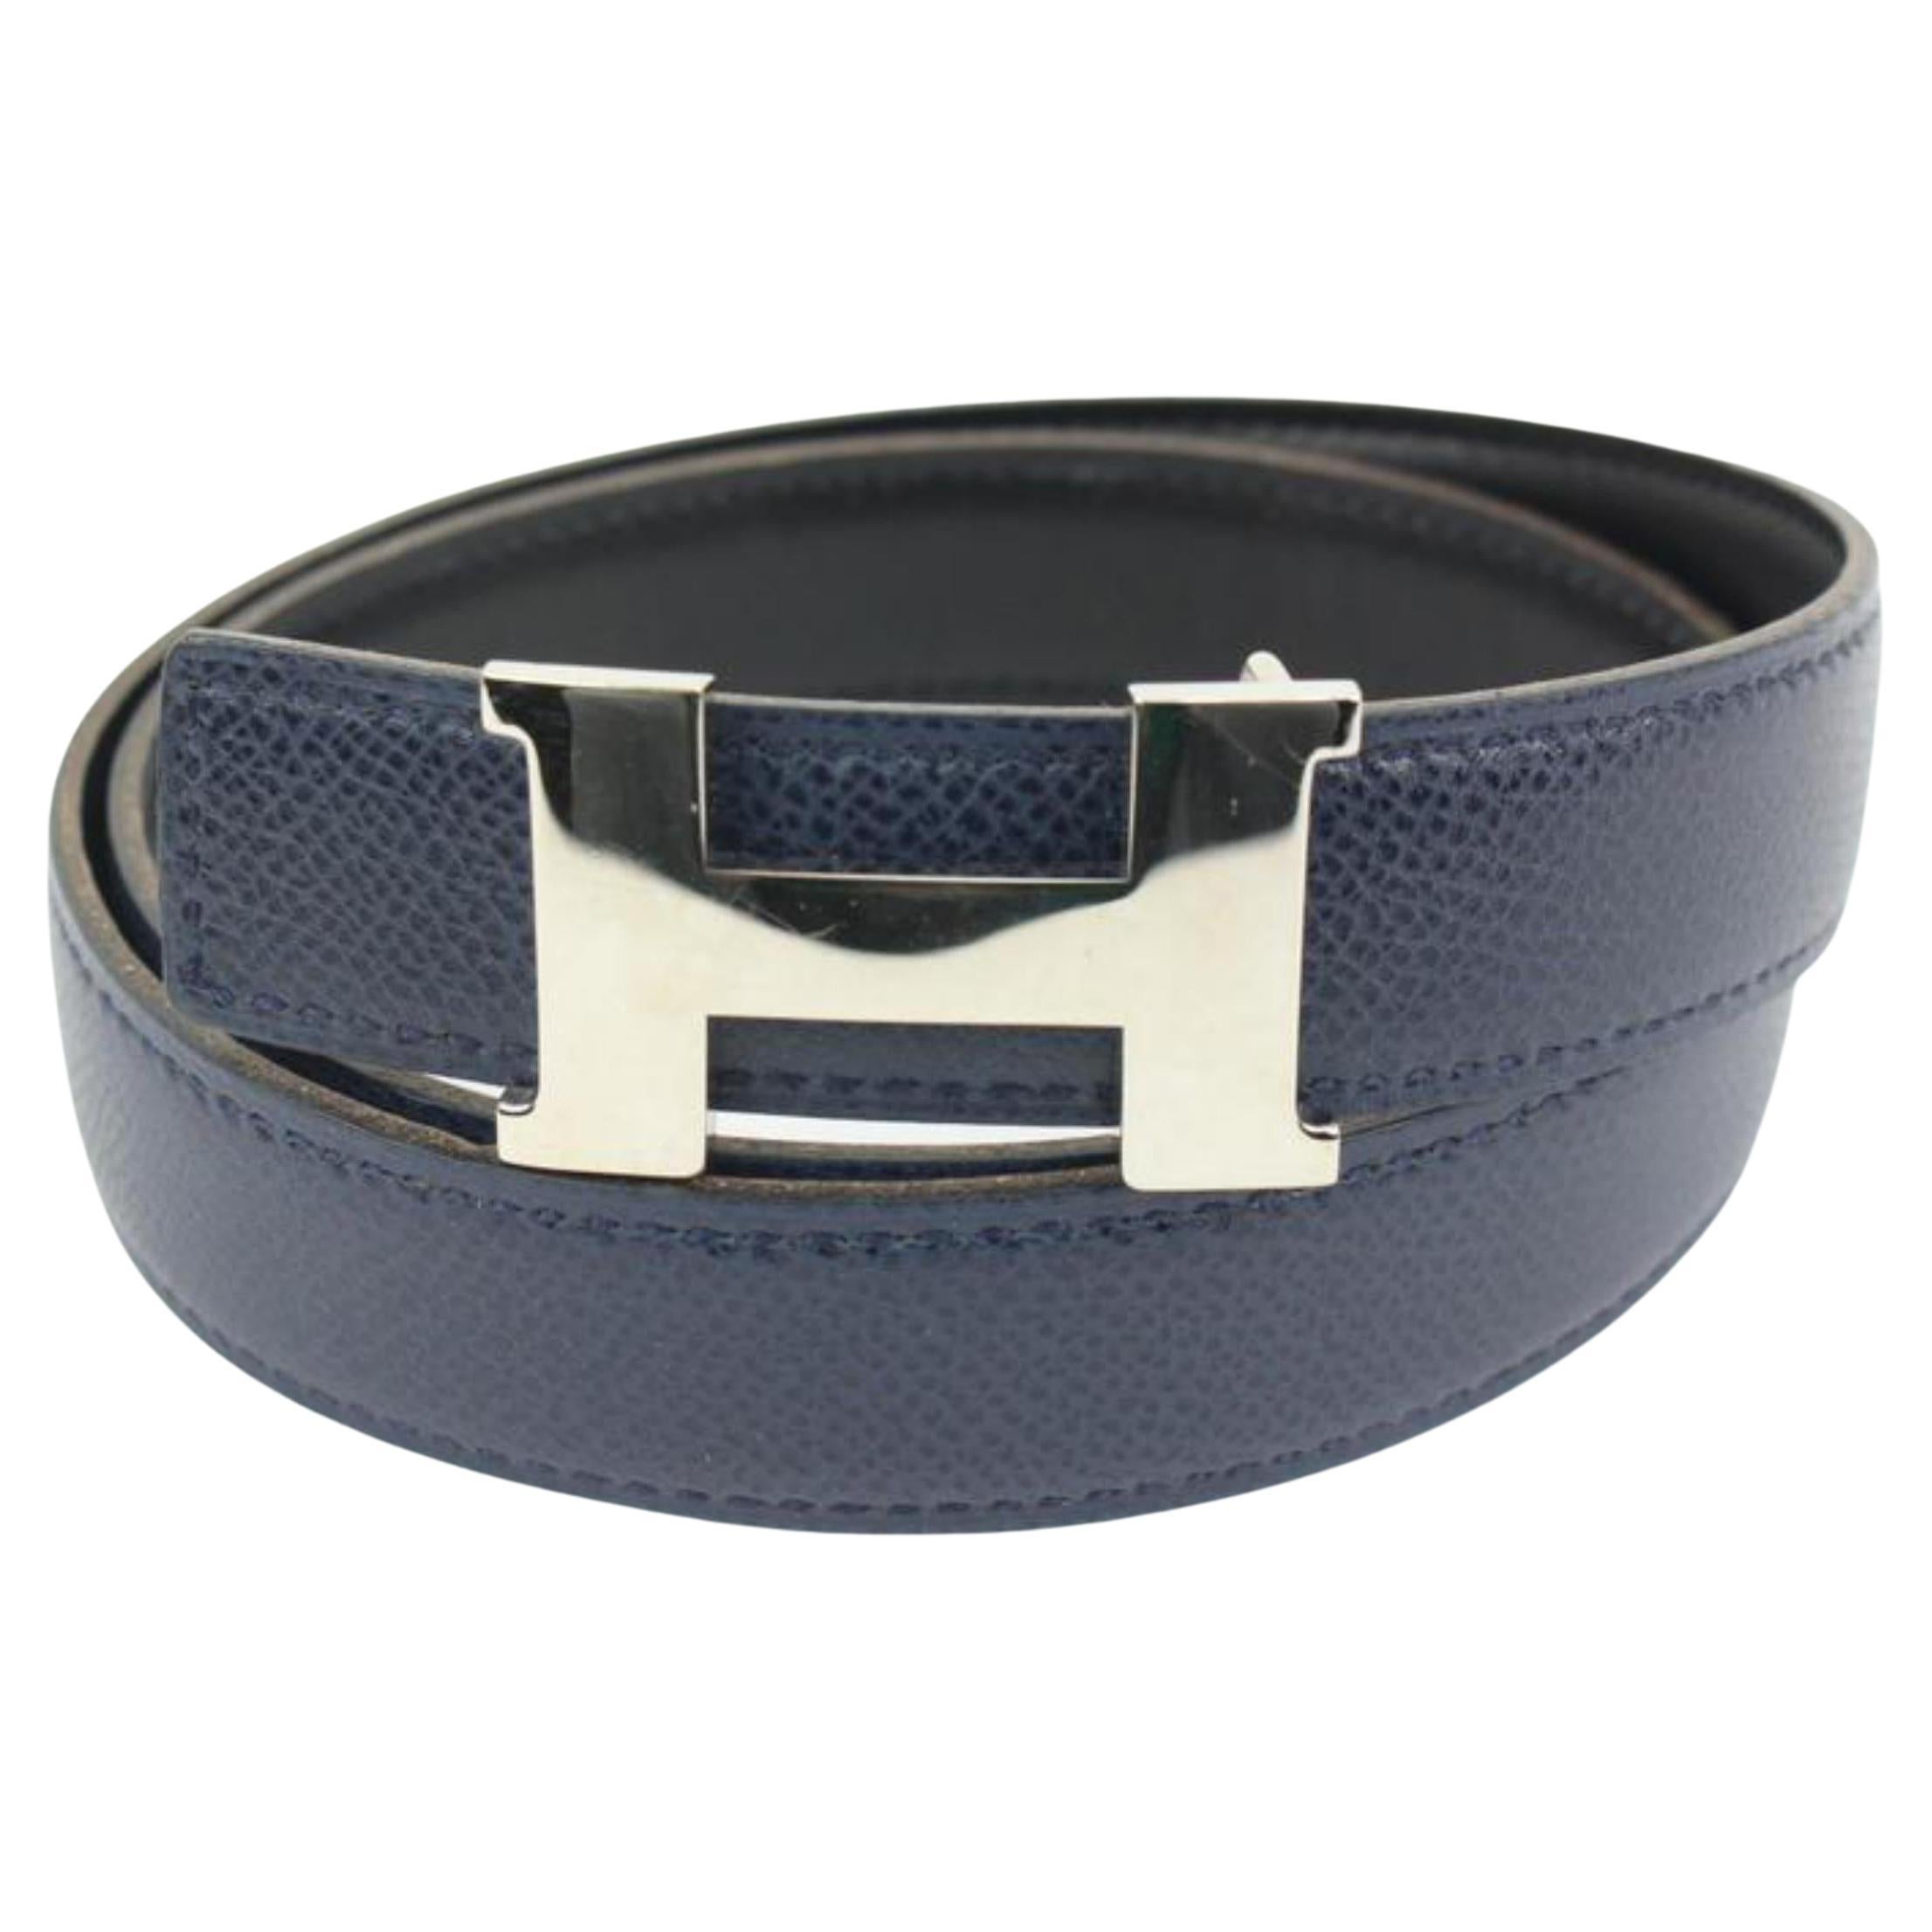 NoName Blue belt combined with silver studs WOMEN FASHION Accessories Belt Navy Blue discount 75% Navy Blue Single 